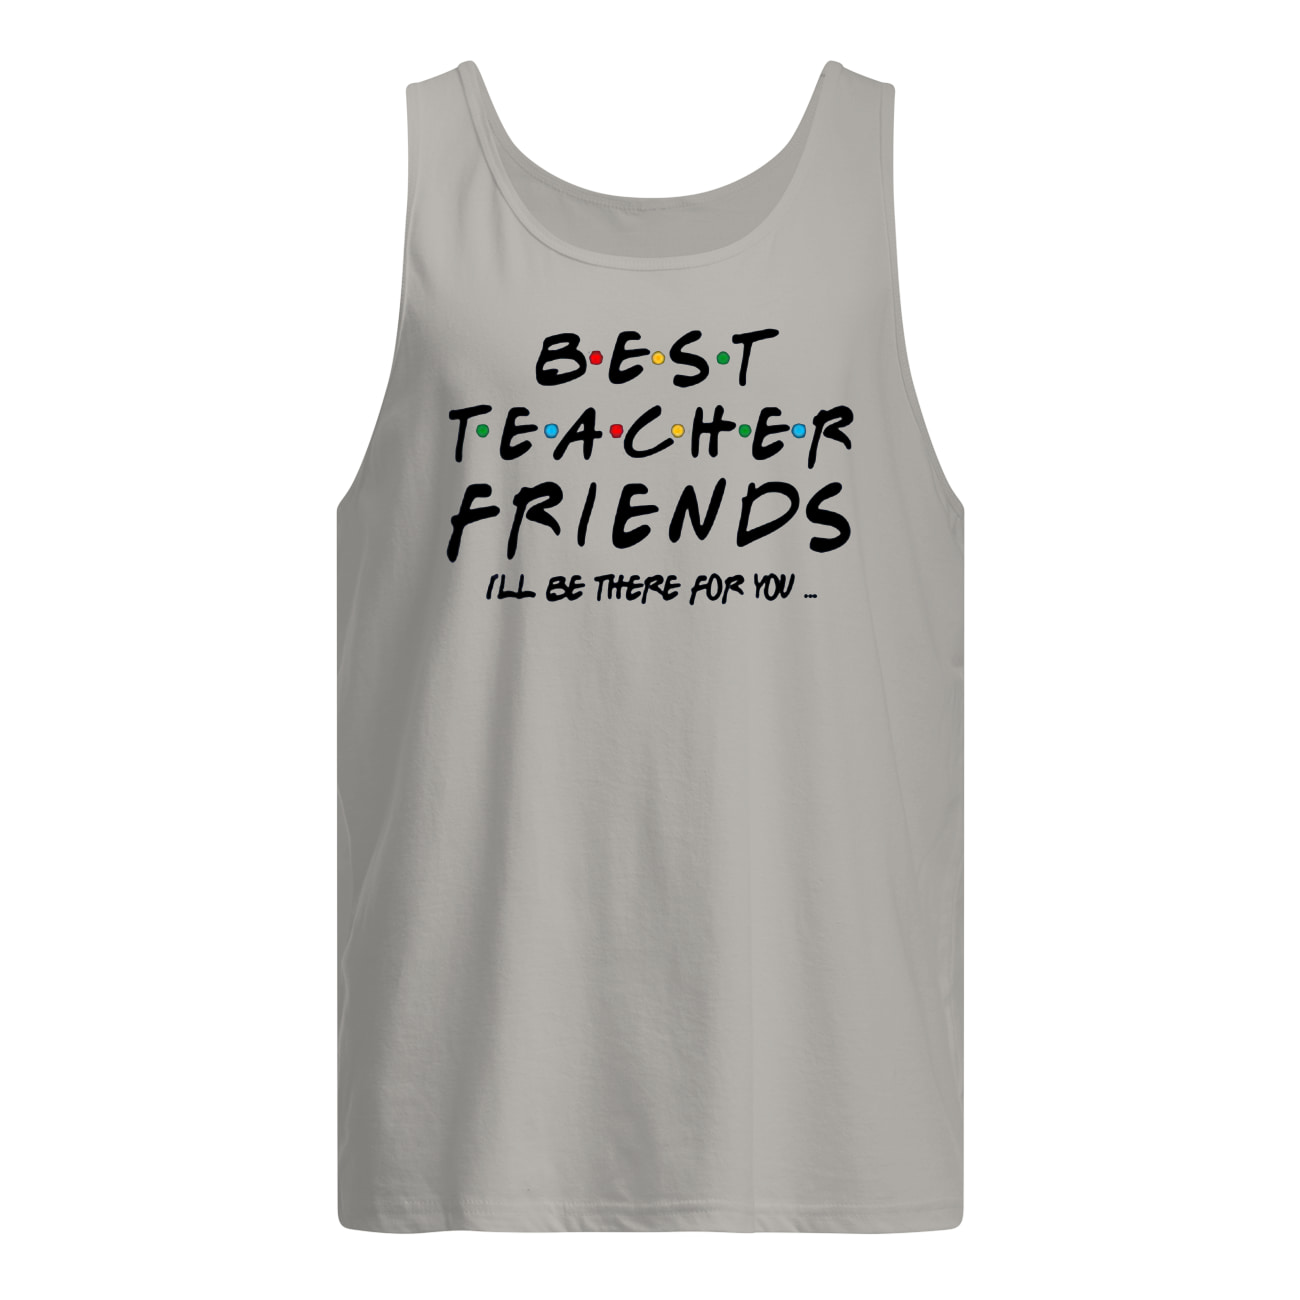 Best teacher friends I'll be there for you friends tv show tank top